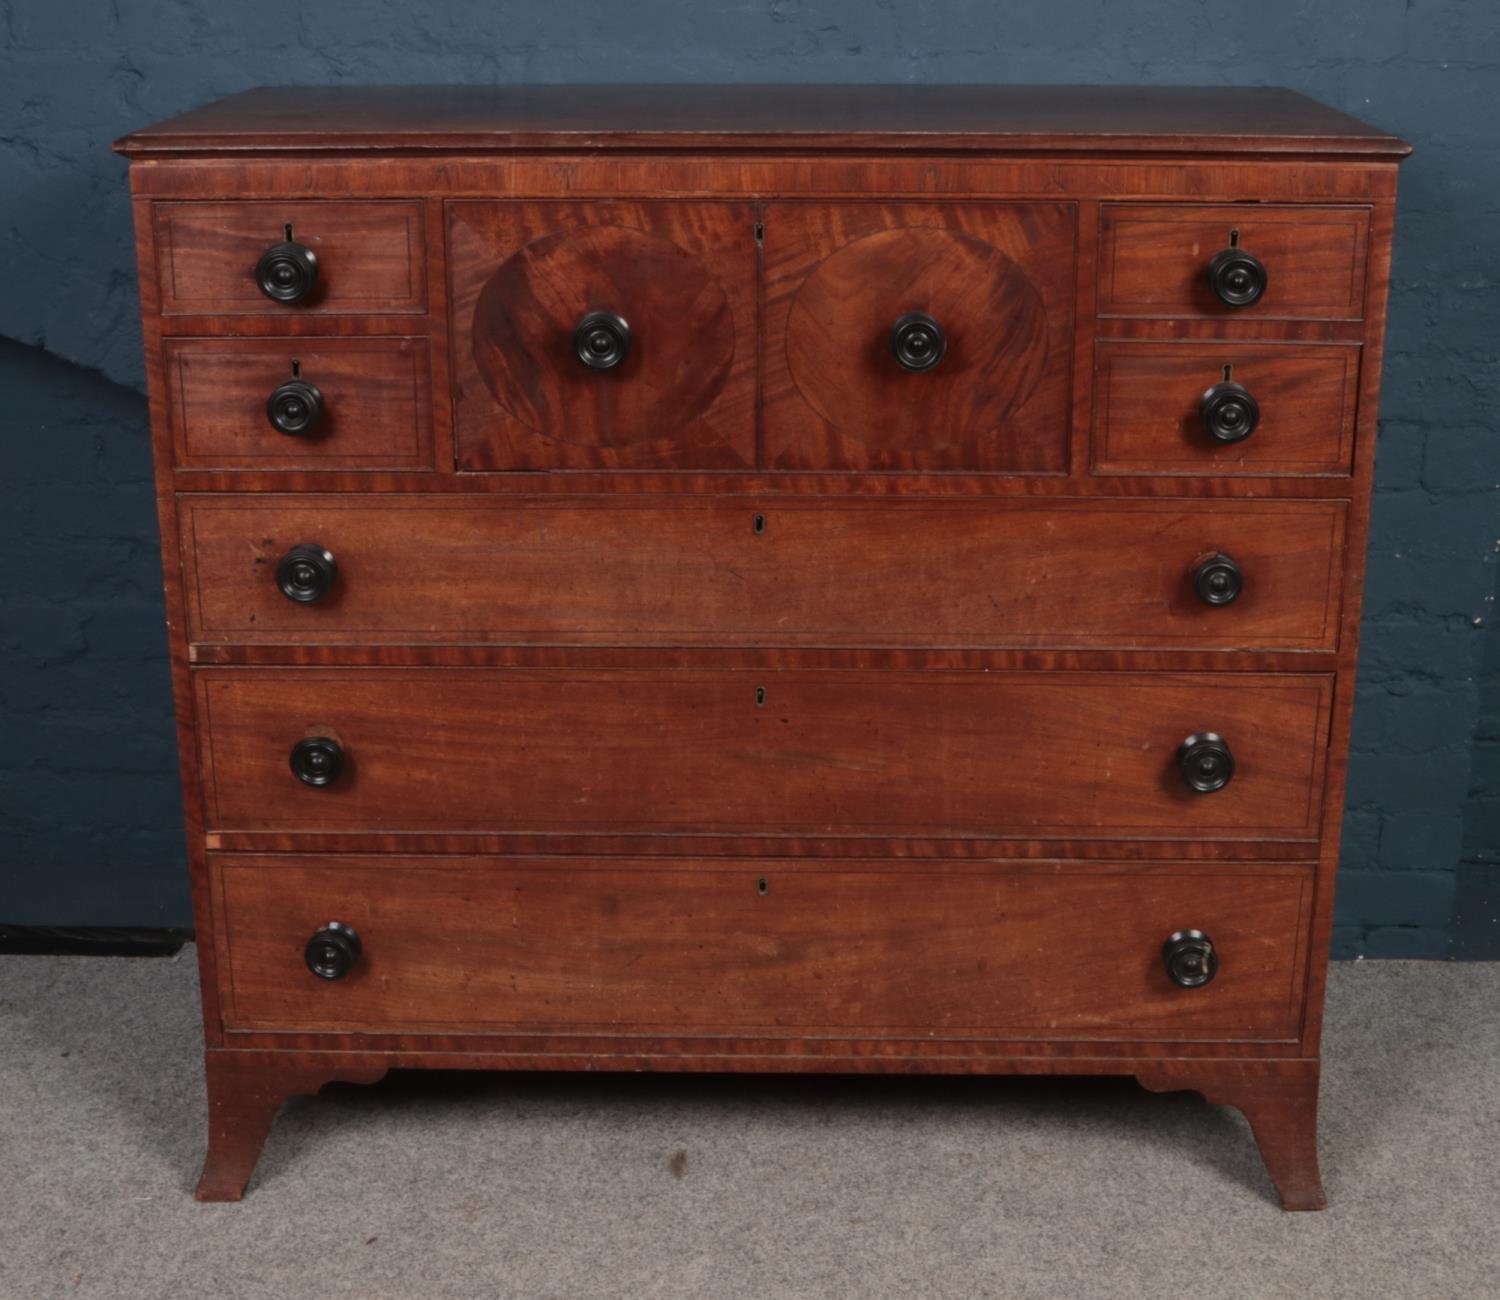 A George III mahogany secretaire chest of drawers. (116cm x 125cm x 57cm). Back leg off. Damage to